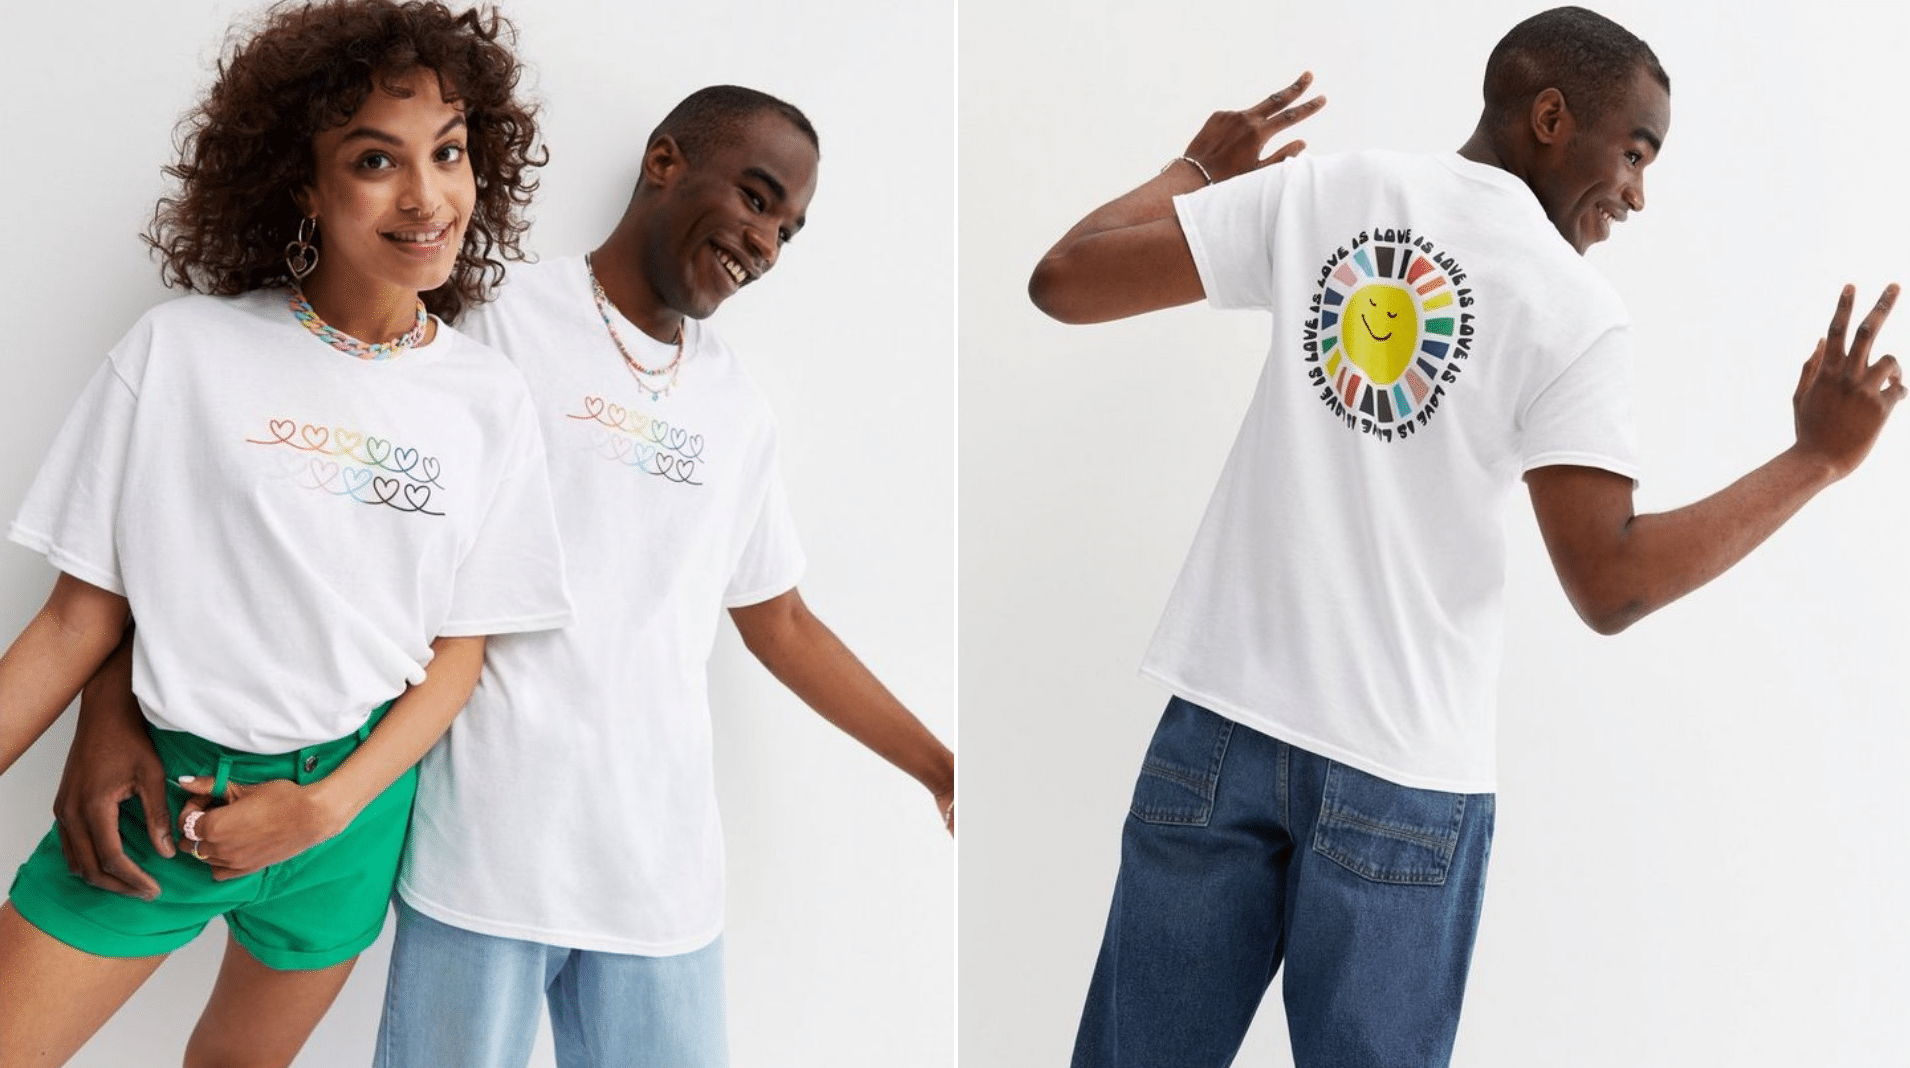 The New Look Pride collection is inspired by the flag of progress.